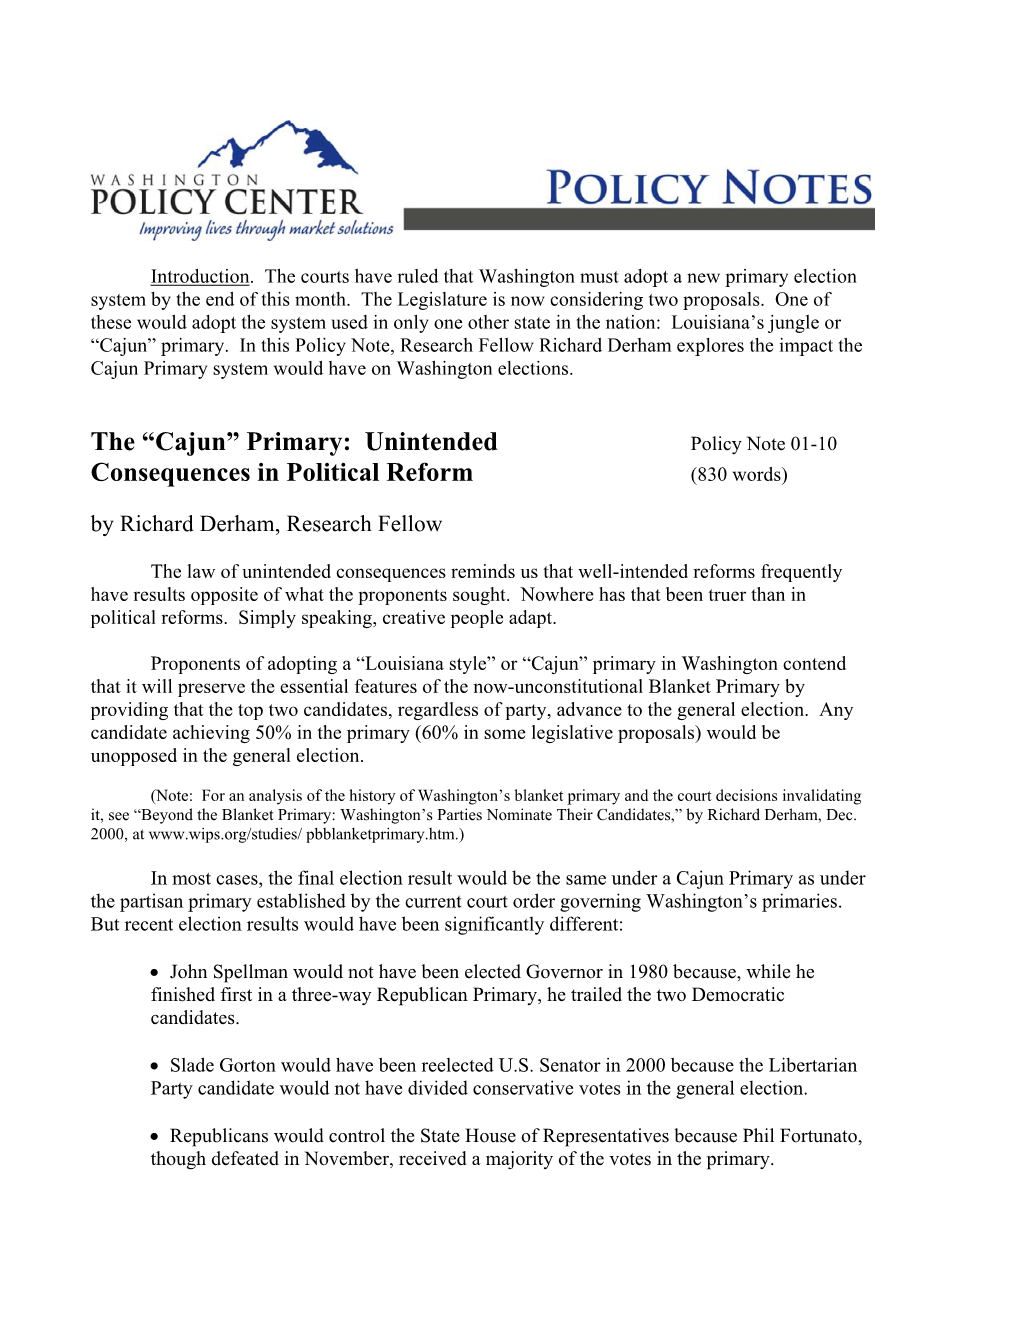 The “Cajun” Primary: Unintended Policy Note 01-10 Consequences in Political Reform (830 Words)